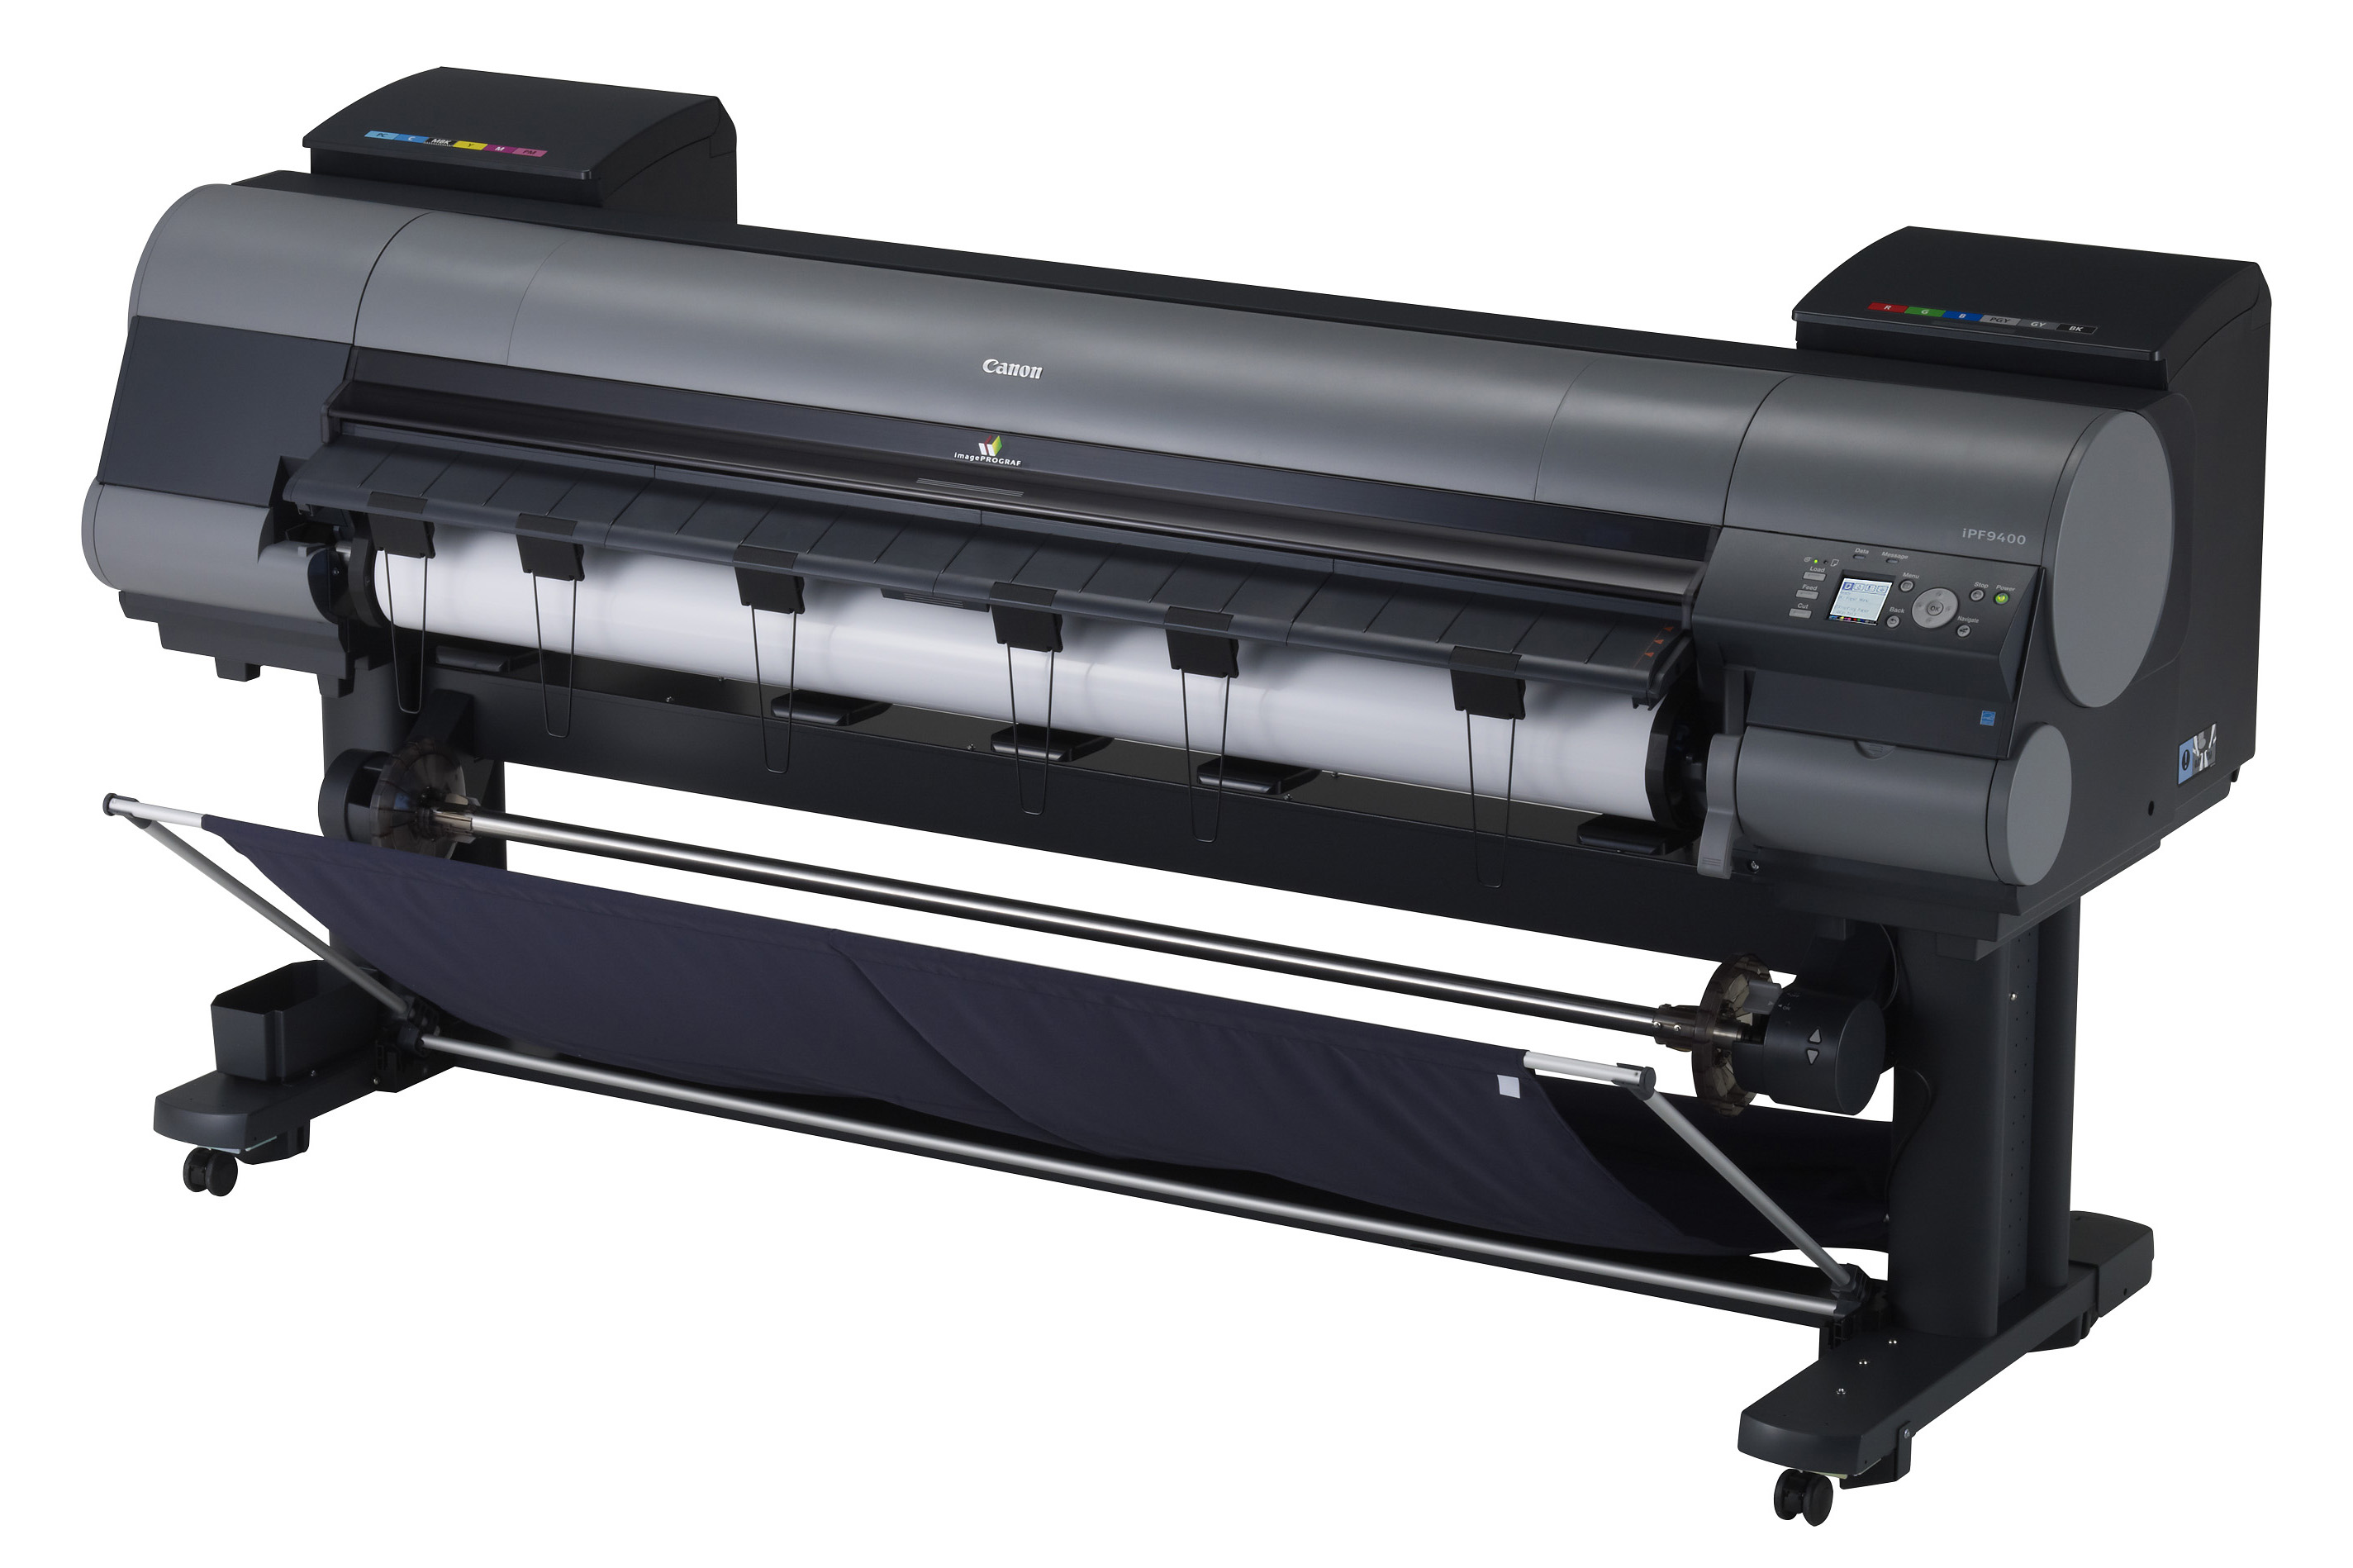 New Canon Inkjet Printer Mail in Rebates Of Up To 1 400 At LexJet 